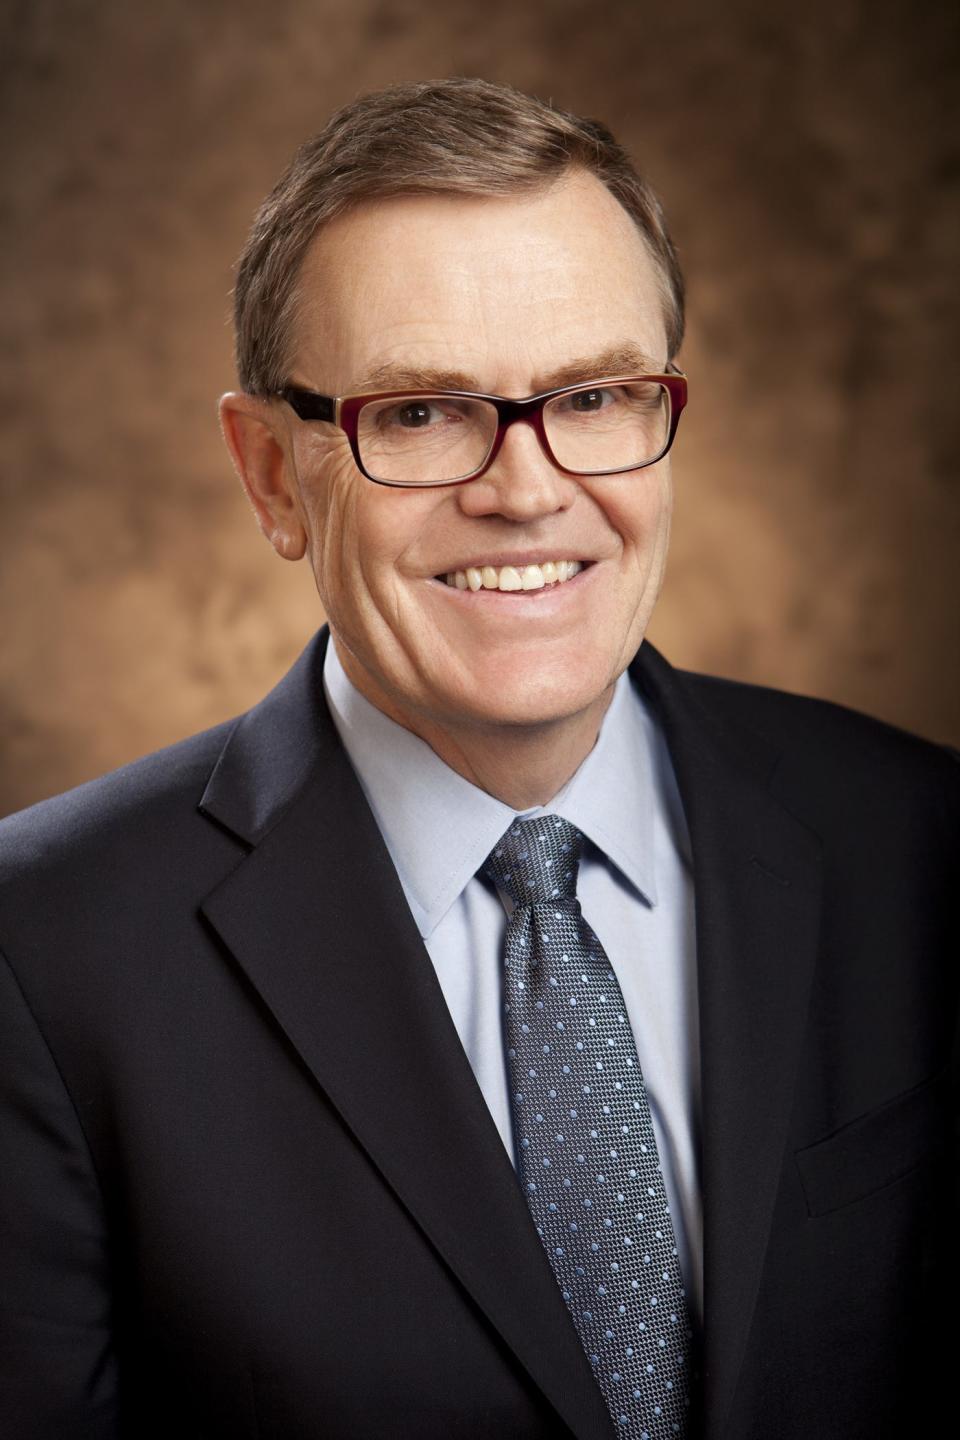 David Abney, who began his career with UPS in 1974, will retire after six years as CEO. He will remain as a special consultant through the end of 2020.